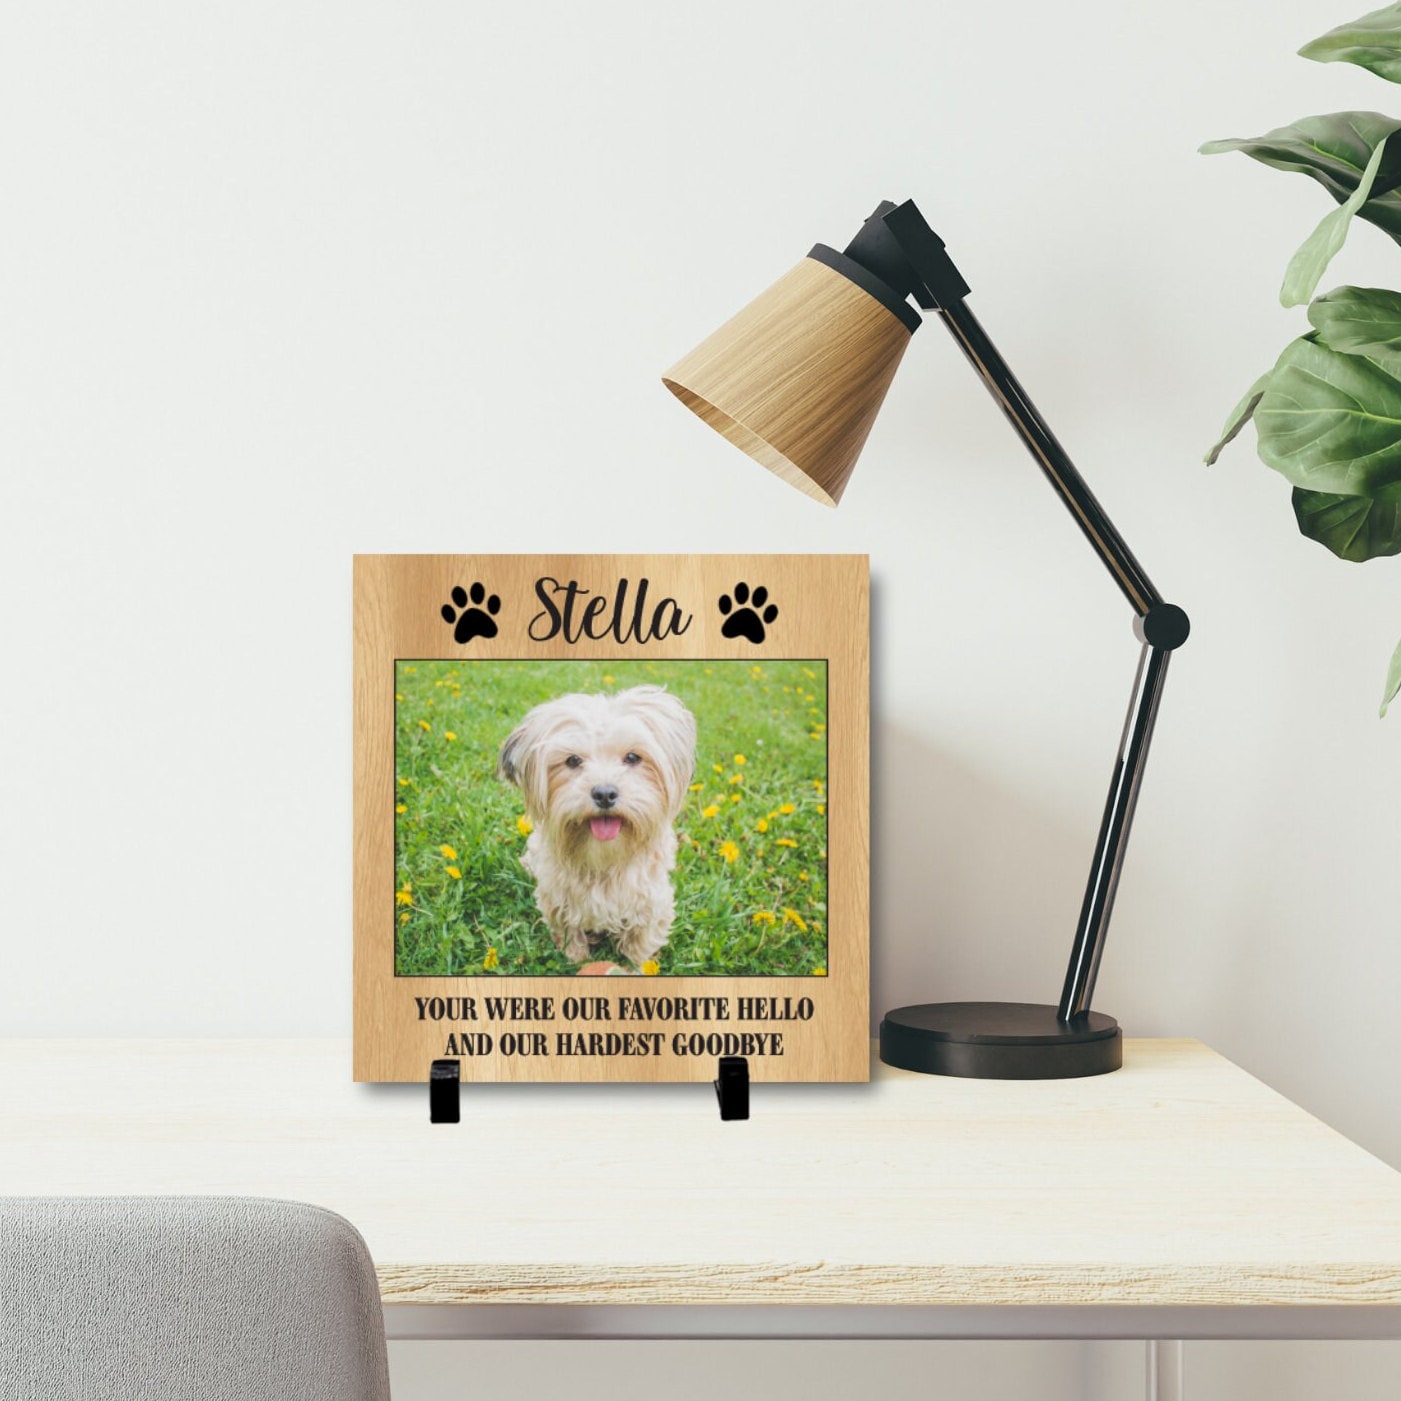 Dog Photo Memorial - 8" x 8" Personalized Dog Memorial - Background choice - You were our favorite hello and hardest goodbye